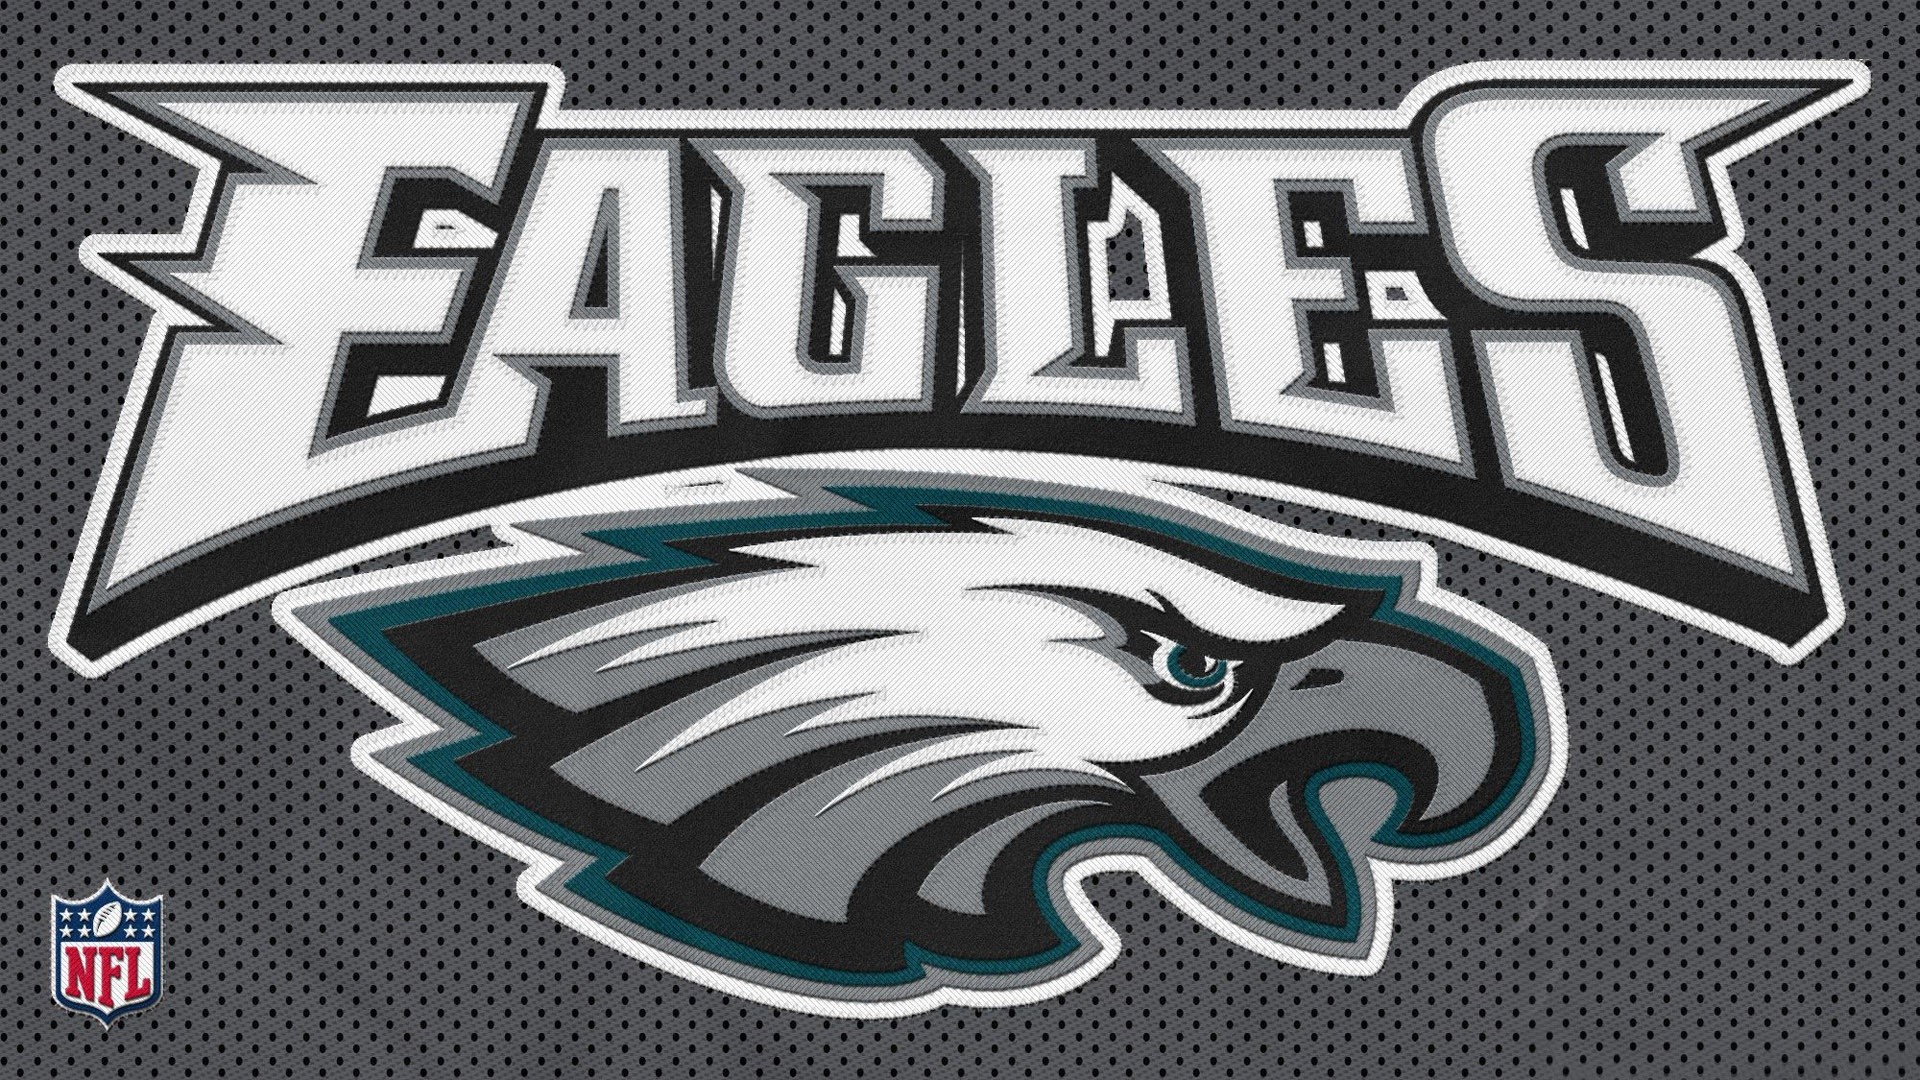 HD Philadelphia Eagles Wallpapers with resolution 1920x1080 pixel. You can make this wallpaper for your Mac or Windows Desktop Background, iPhone, Android or Tablet and another Smartphone device